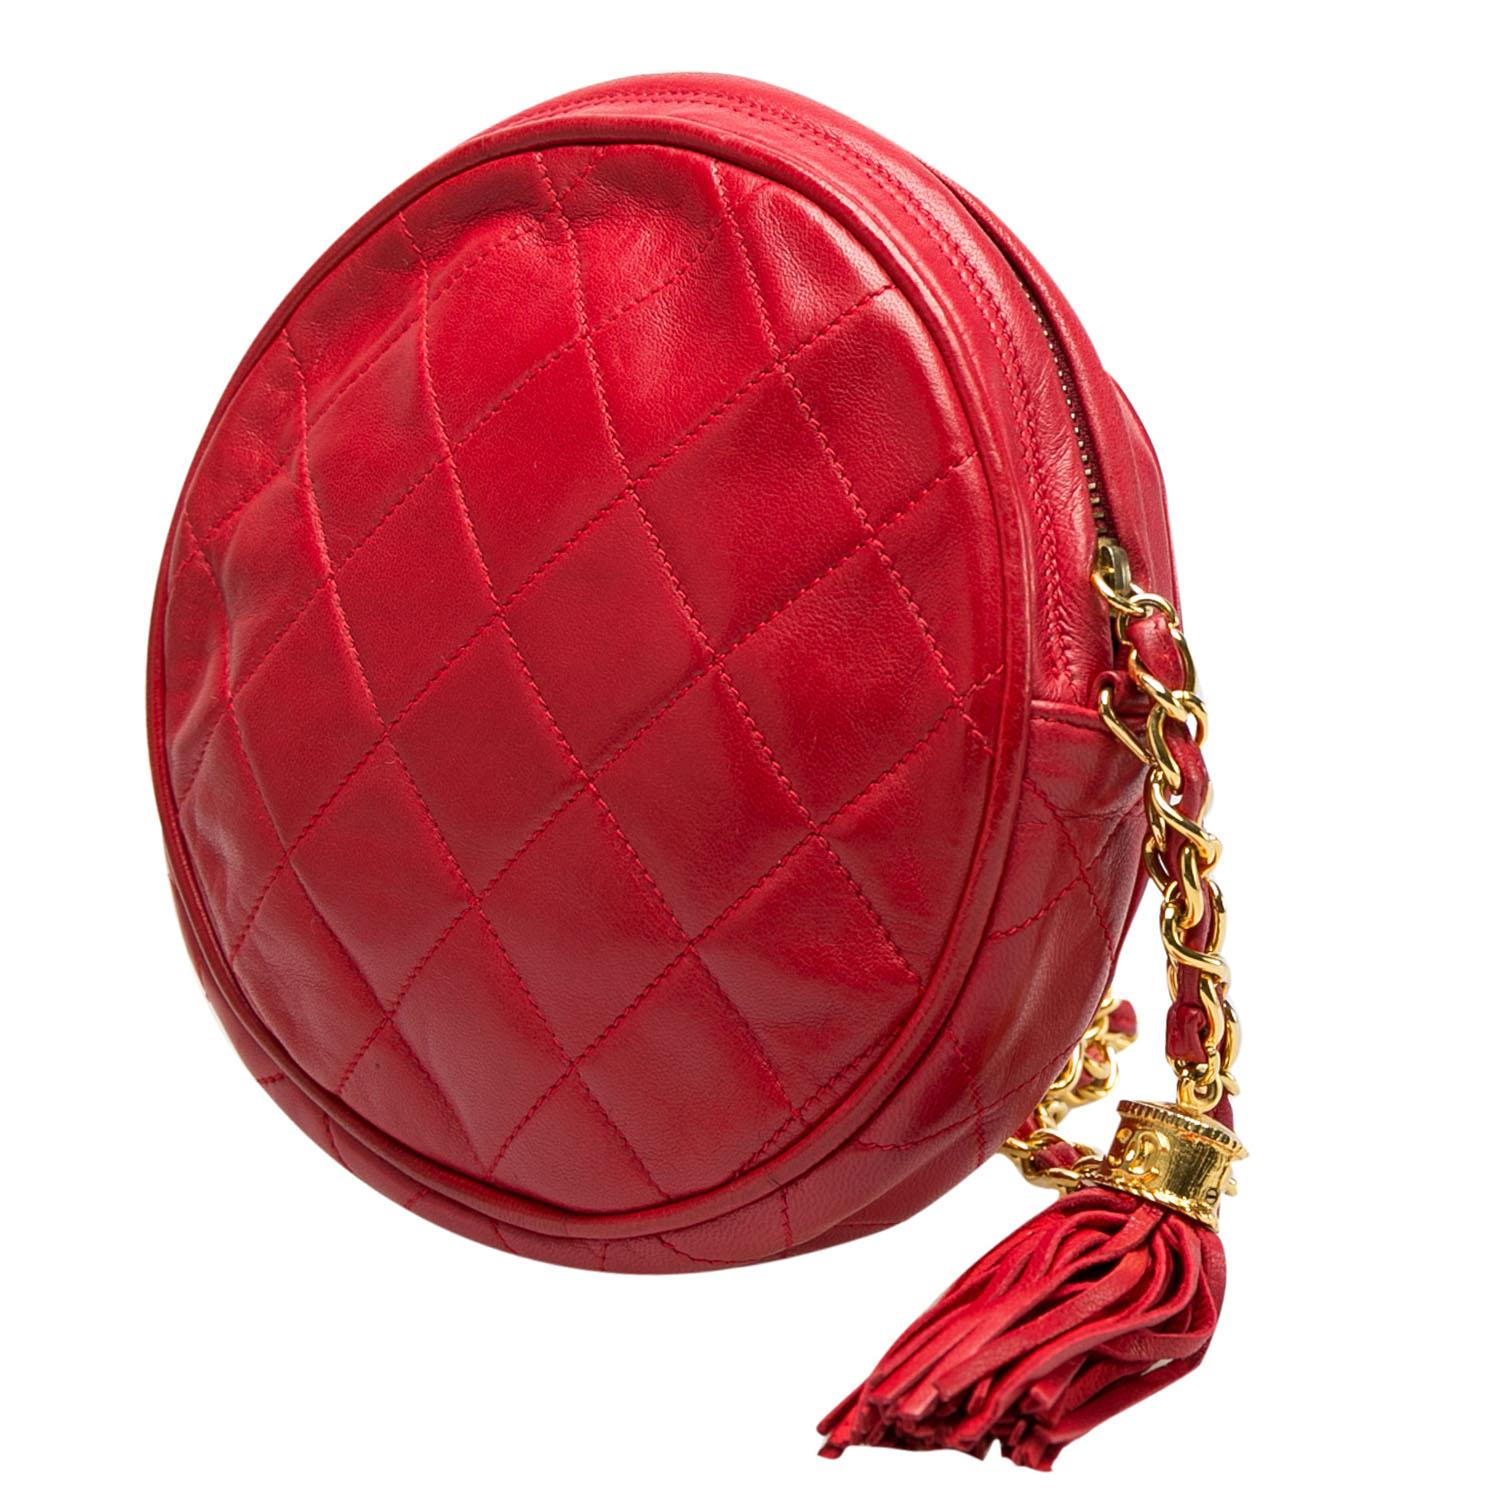 Chanel Red Quilted Leather Vintage Round Crossbody Bag 3